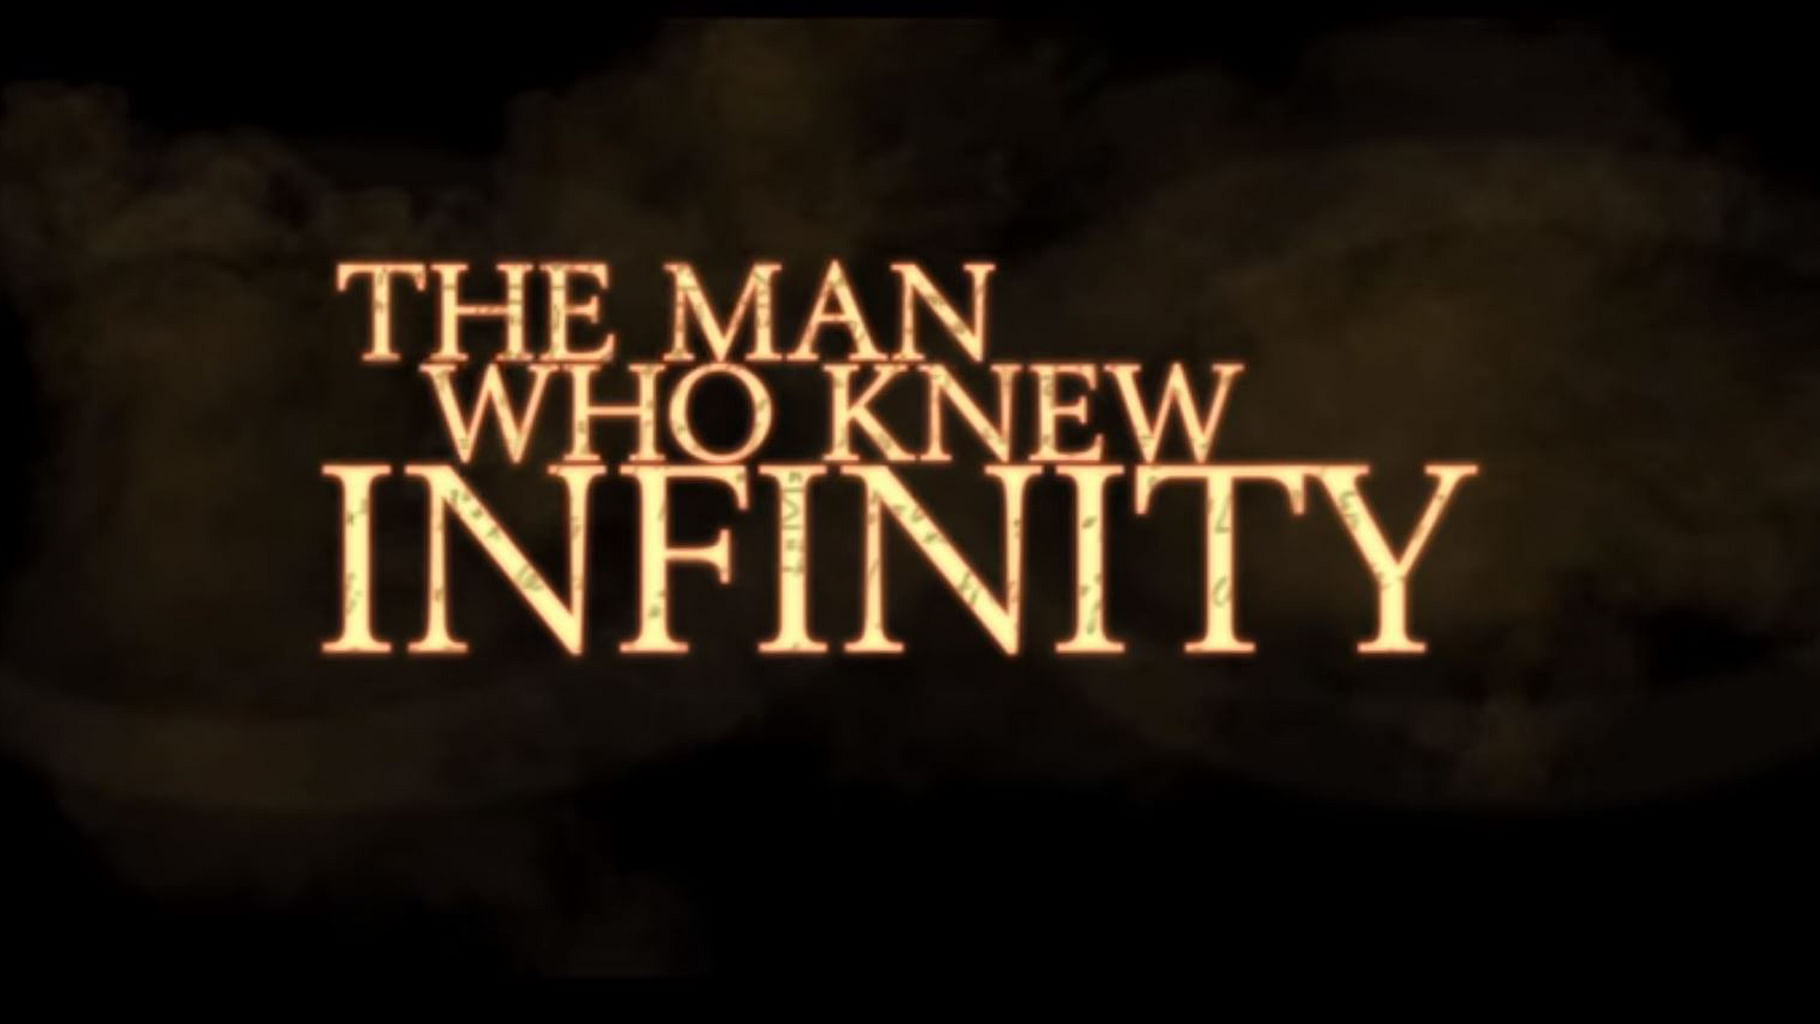 A screengrab from the trailer of the movie <i>The Man who Knew Infinity: A life of the genius Ramanujan </i>based on the life of Indian mathematician, Ramanujan. (Photo Courtesy: Youtube/<a href="https://www.youtube.com/watch?v=oXGm9Vlfx4w">Movieclips Trailers</a>)